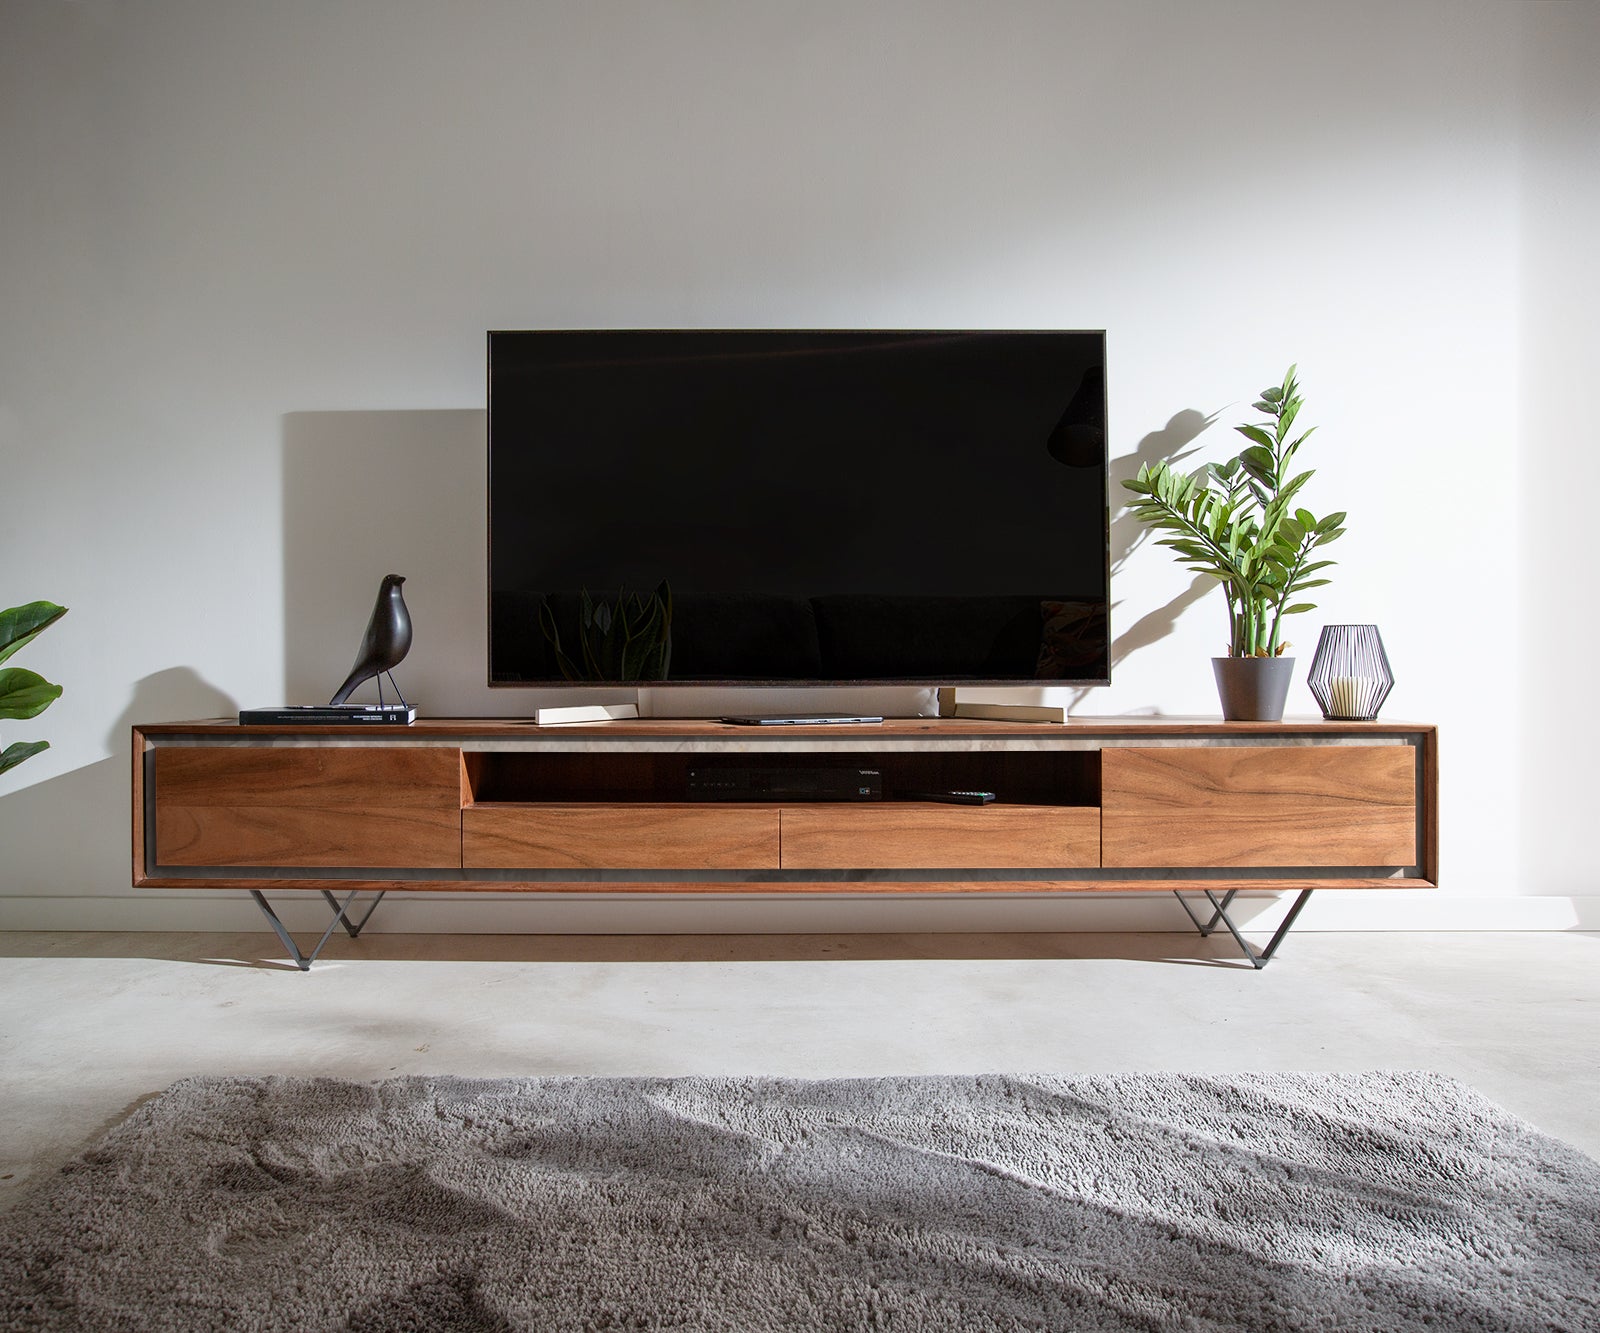 TV Stand Stonegrace 240 cm 2 Doors Center Compartment Acacia Wood Brown Stone Veneer V-Foot Black